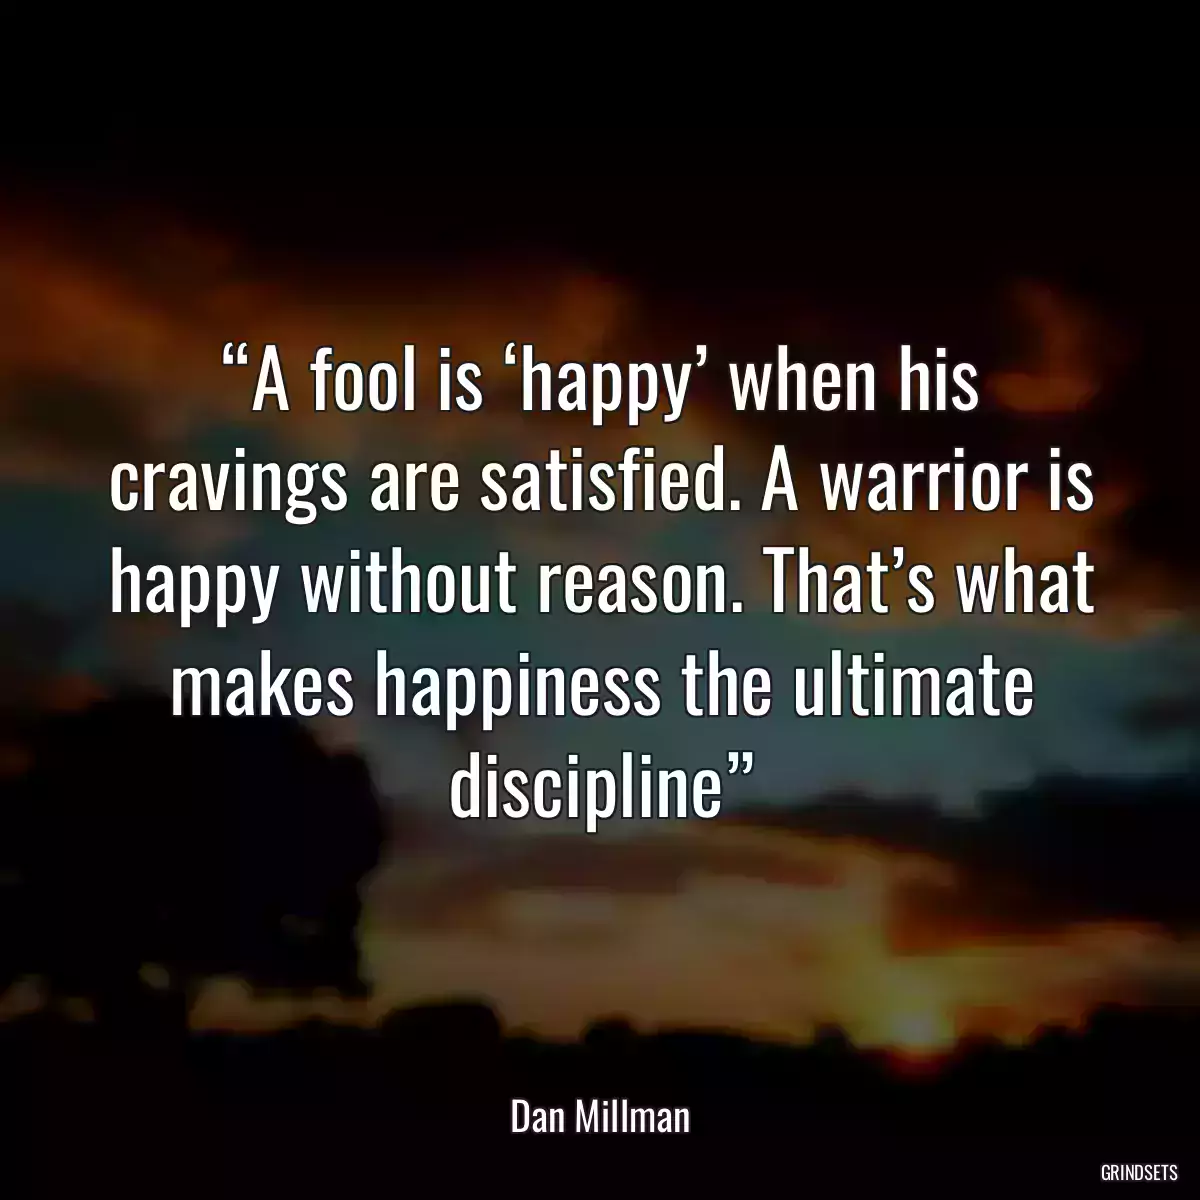 “A fool is ‘happy’ when his cravings are satisfied. A warrior is happy without reason. That’s what makes happiness the ultimate discipline”